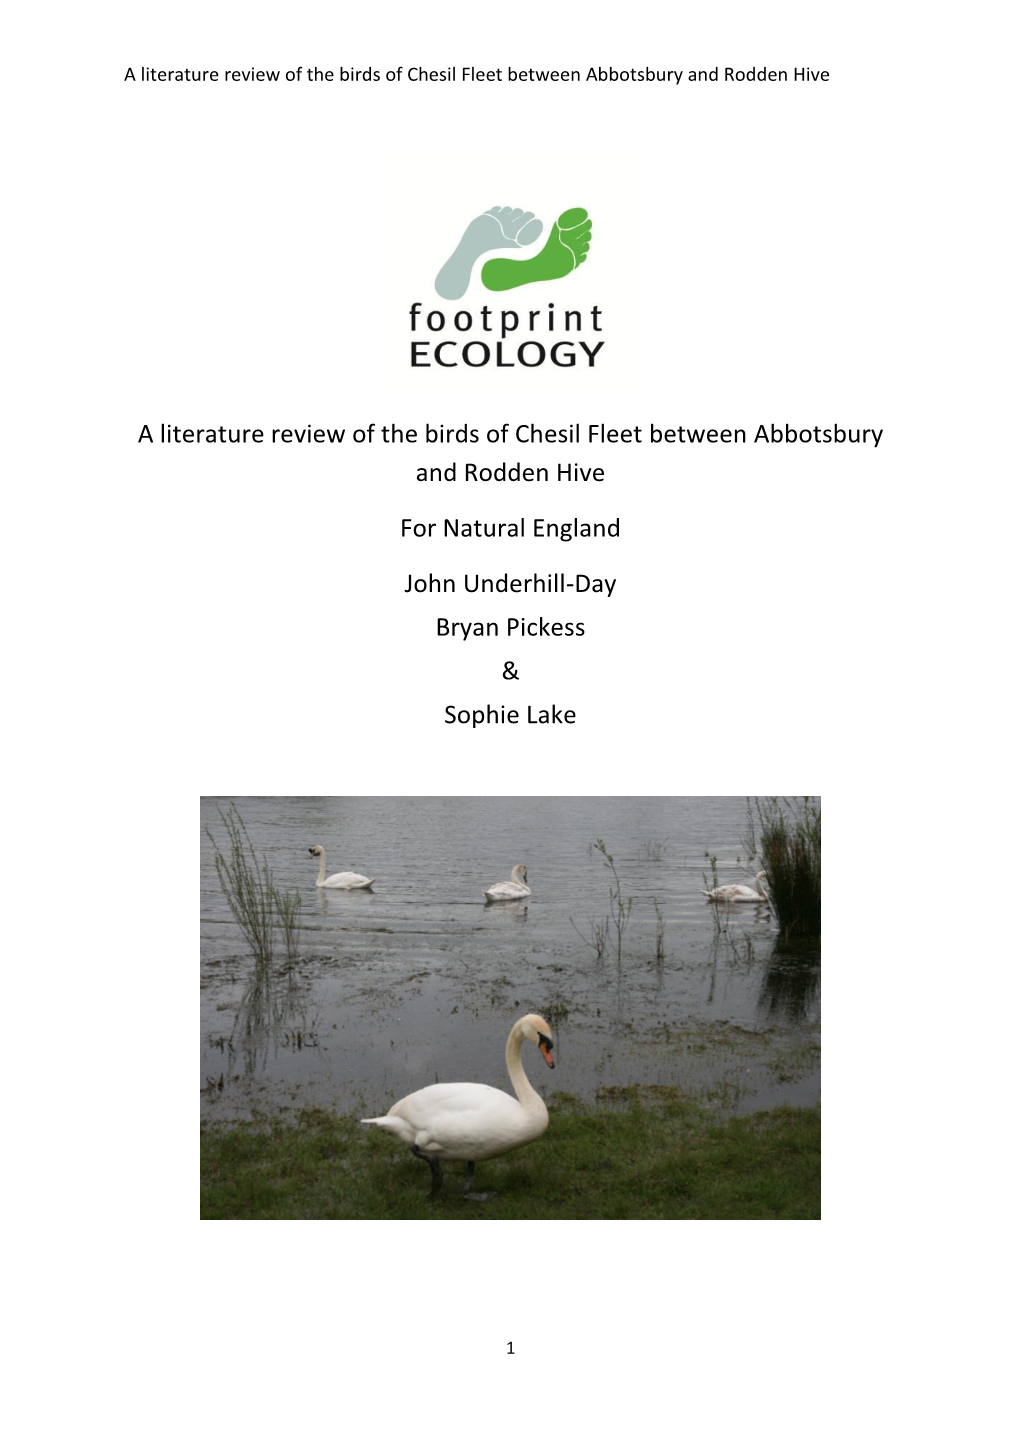 A Literature Review of the Birds of Chesil Fleet Between Abbotsbury and Rodden Hive